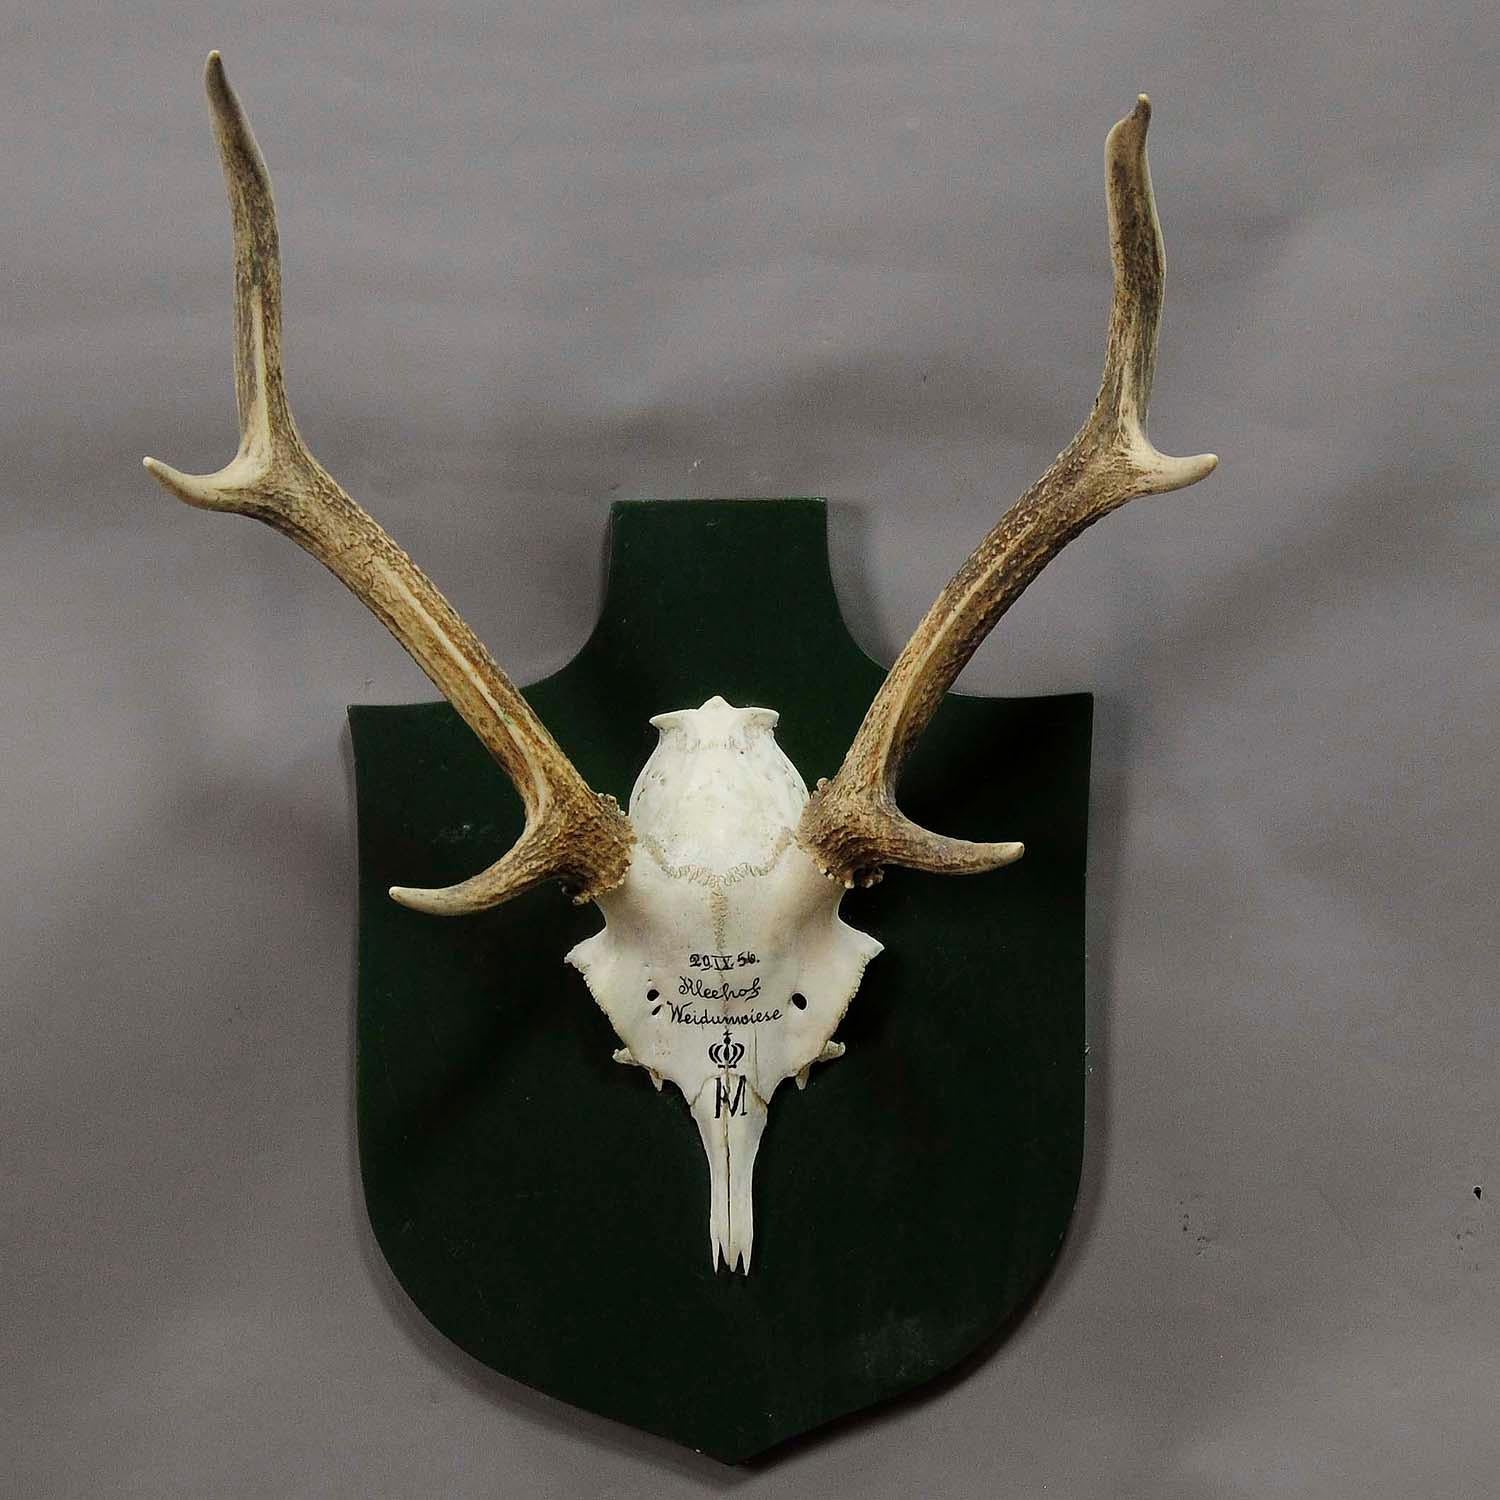 A vintage Black Forest deer trophy from the palace of Salem in south Germany. Shoot by a member of the lordly family of Badenin 1956. Handwritten inscriptions on the skull with, place of the hunt and date 1956. Mounted on a wooden plaque, good